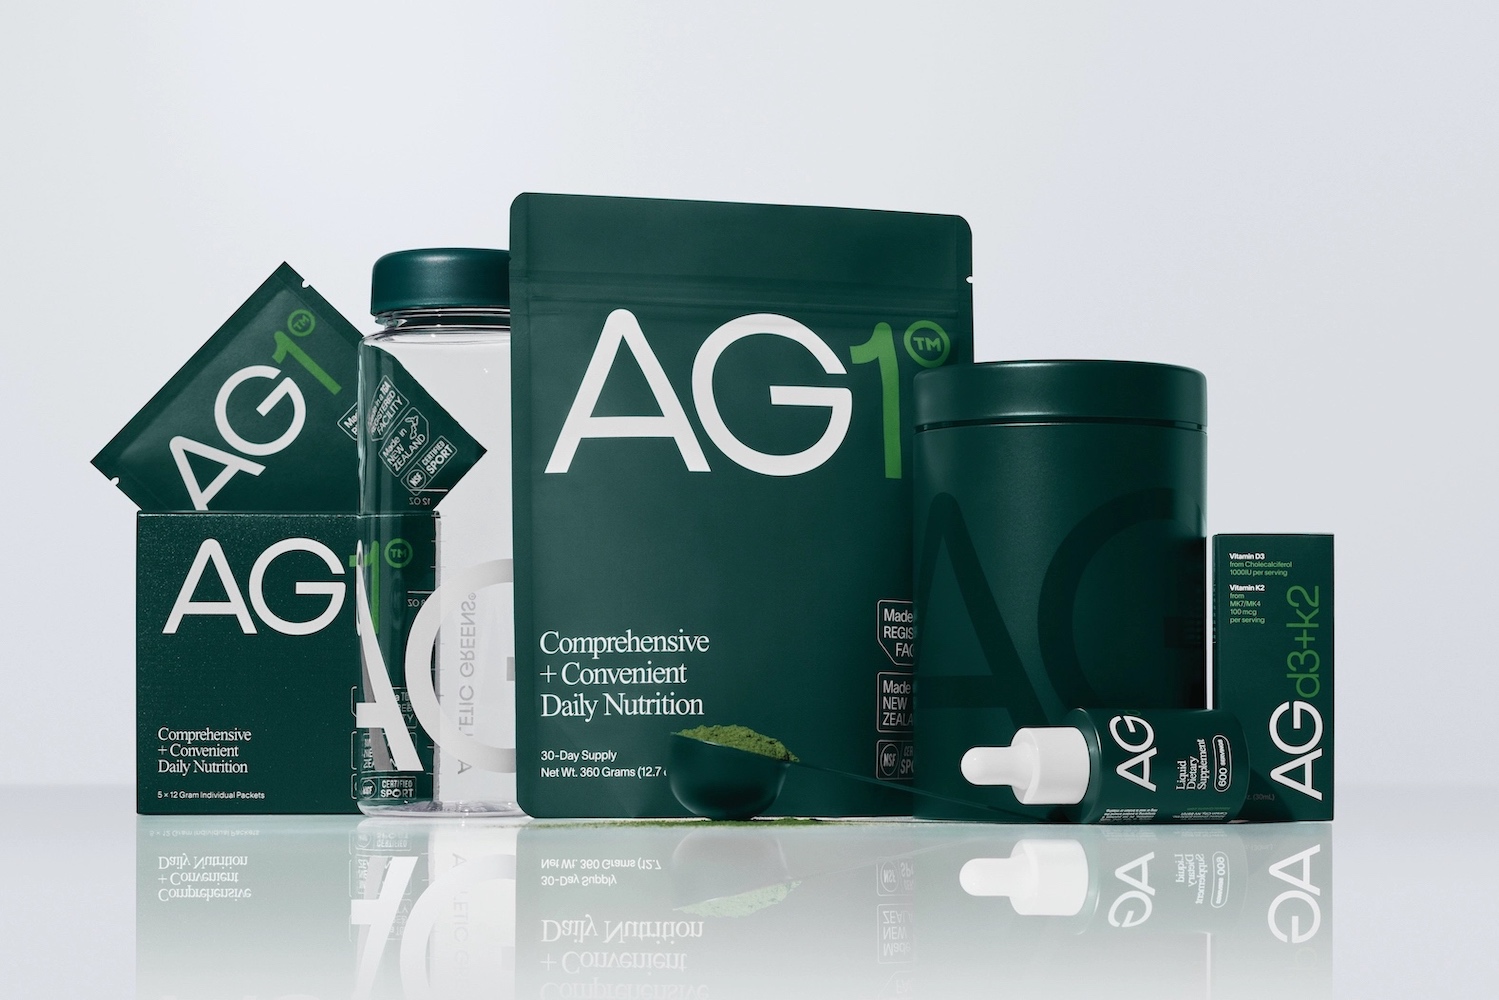 I Tried Athletic Greens For 90 Days: Here’s My Honest Review